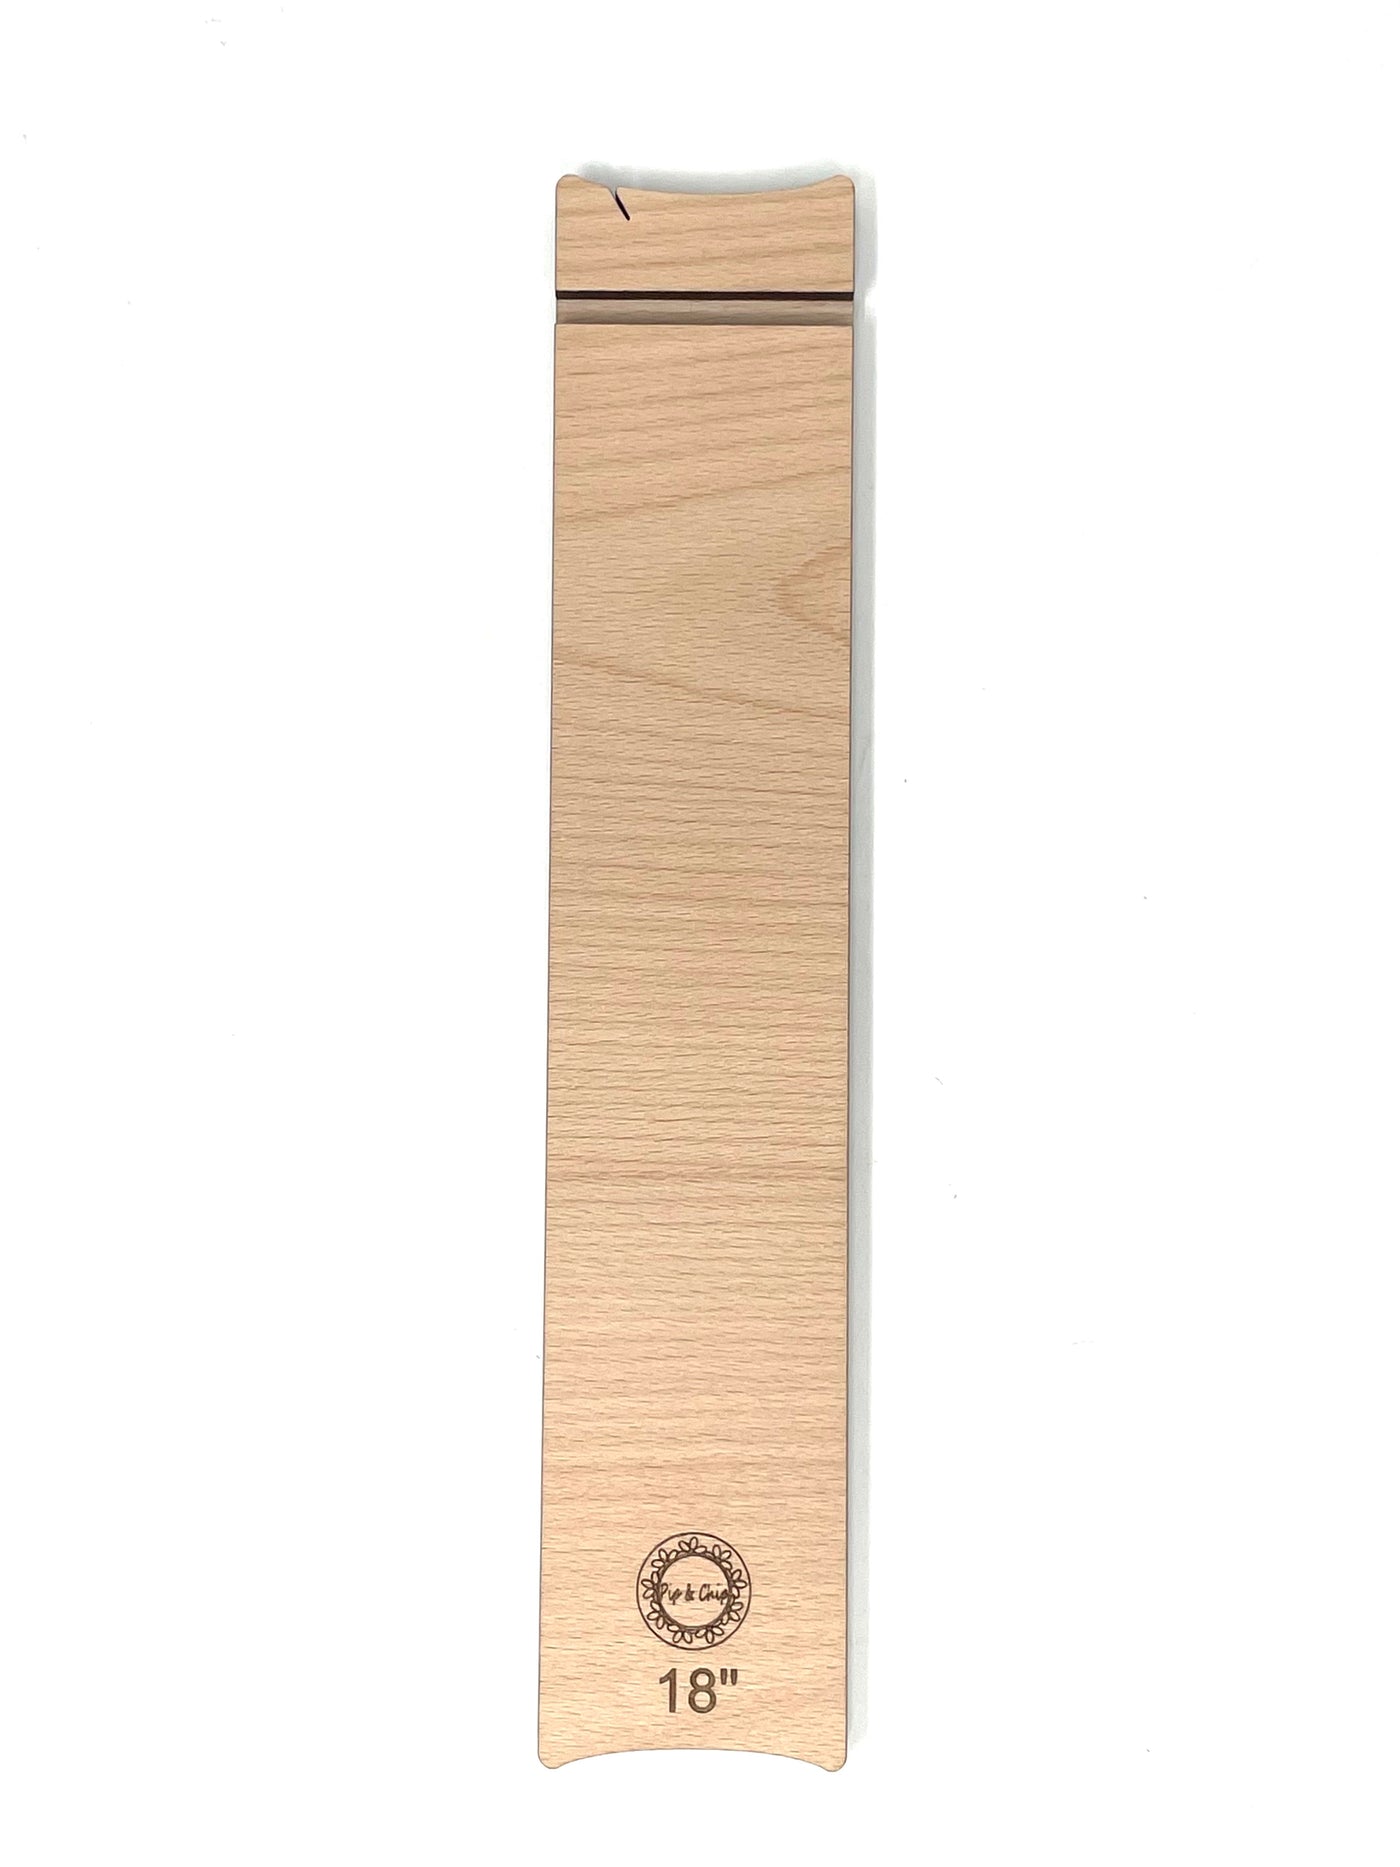 Wooden Floss ruler 9/18", 12/24" or 18/36" - tool to help you cut your thread the same length every time